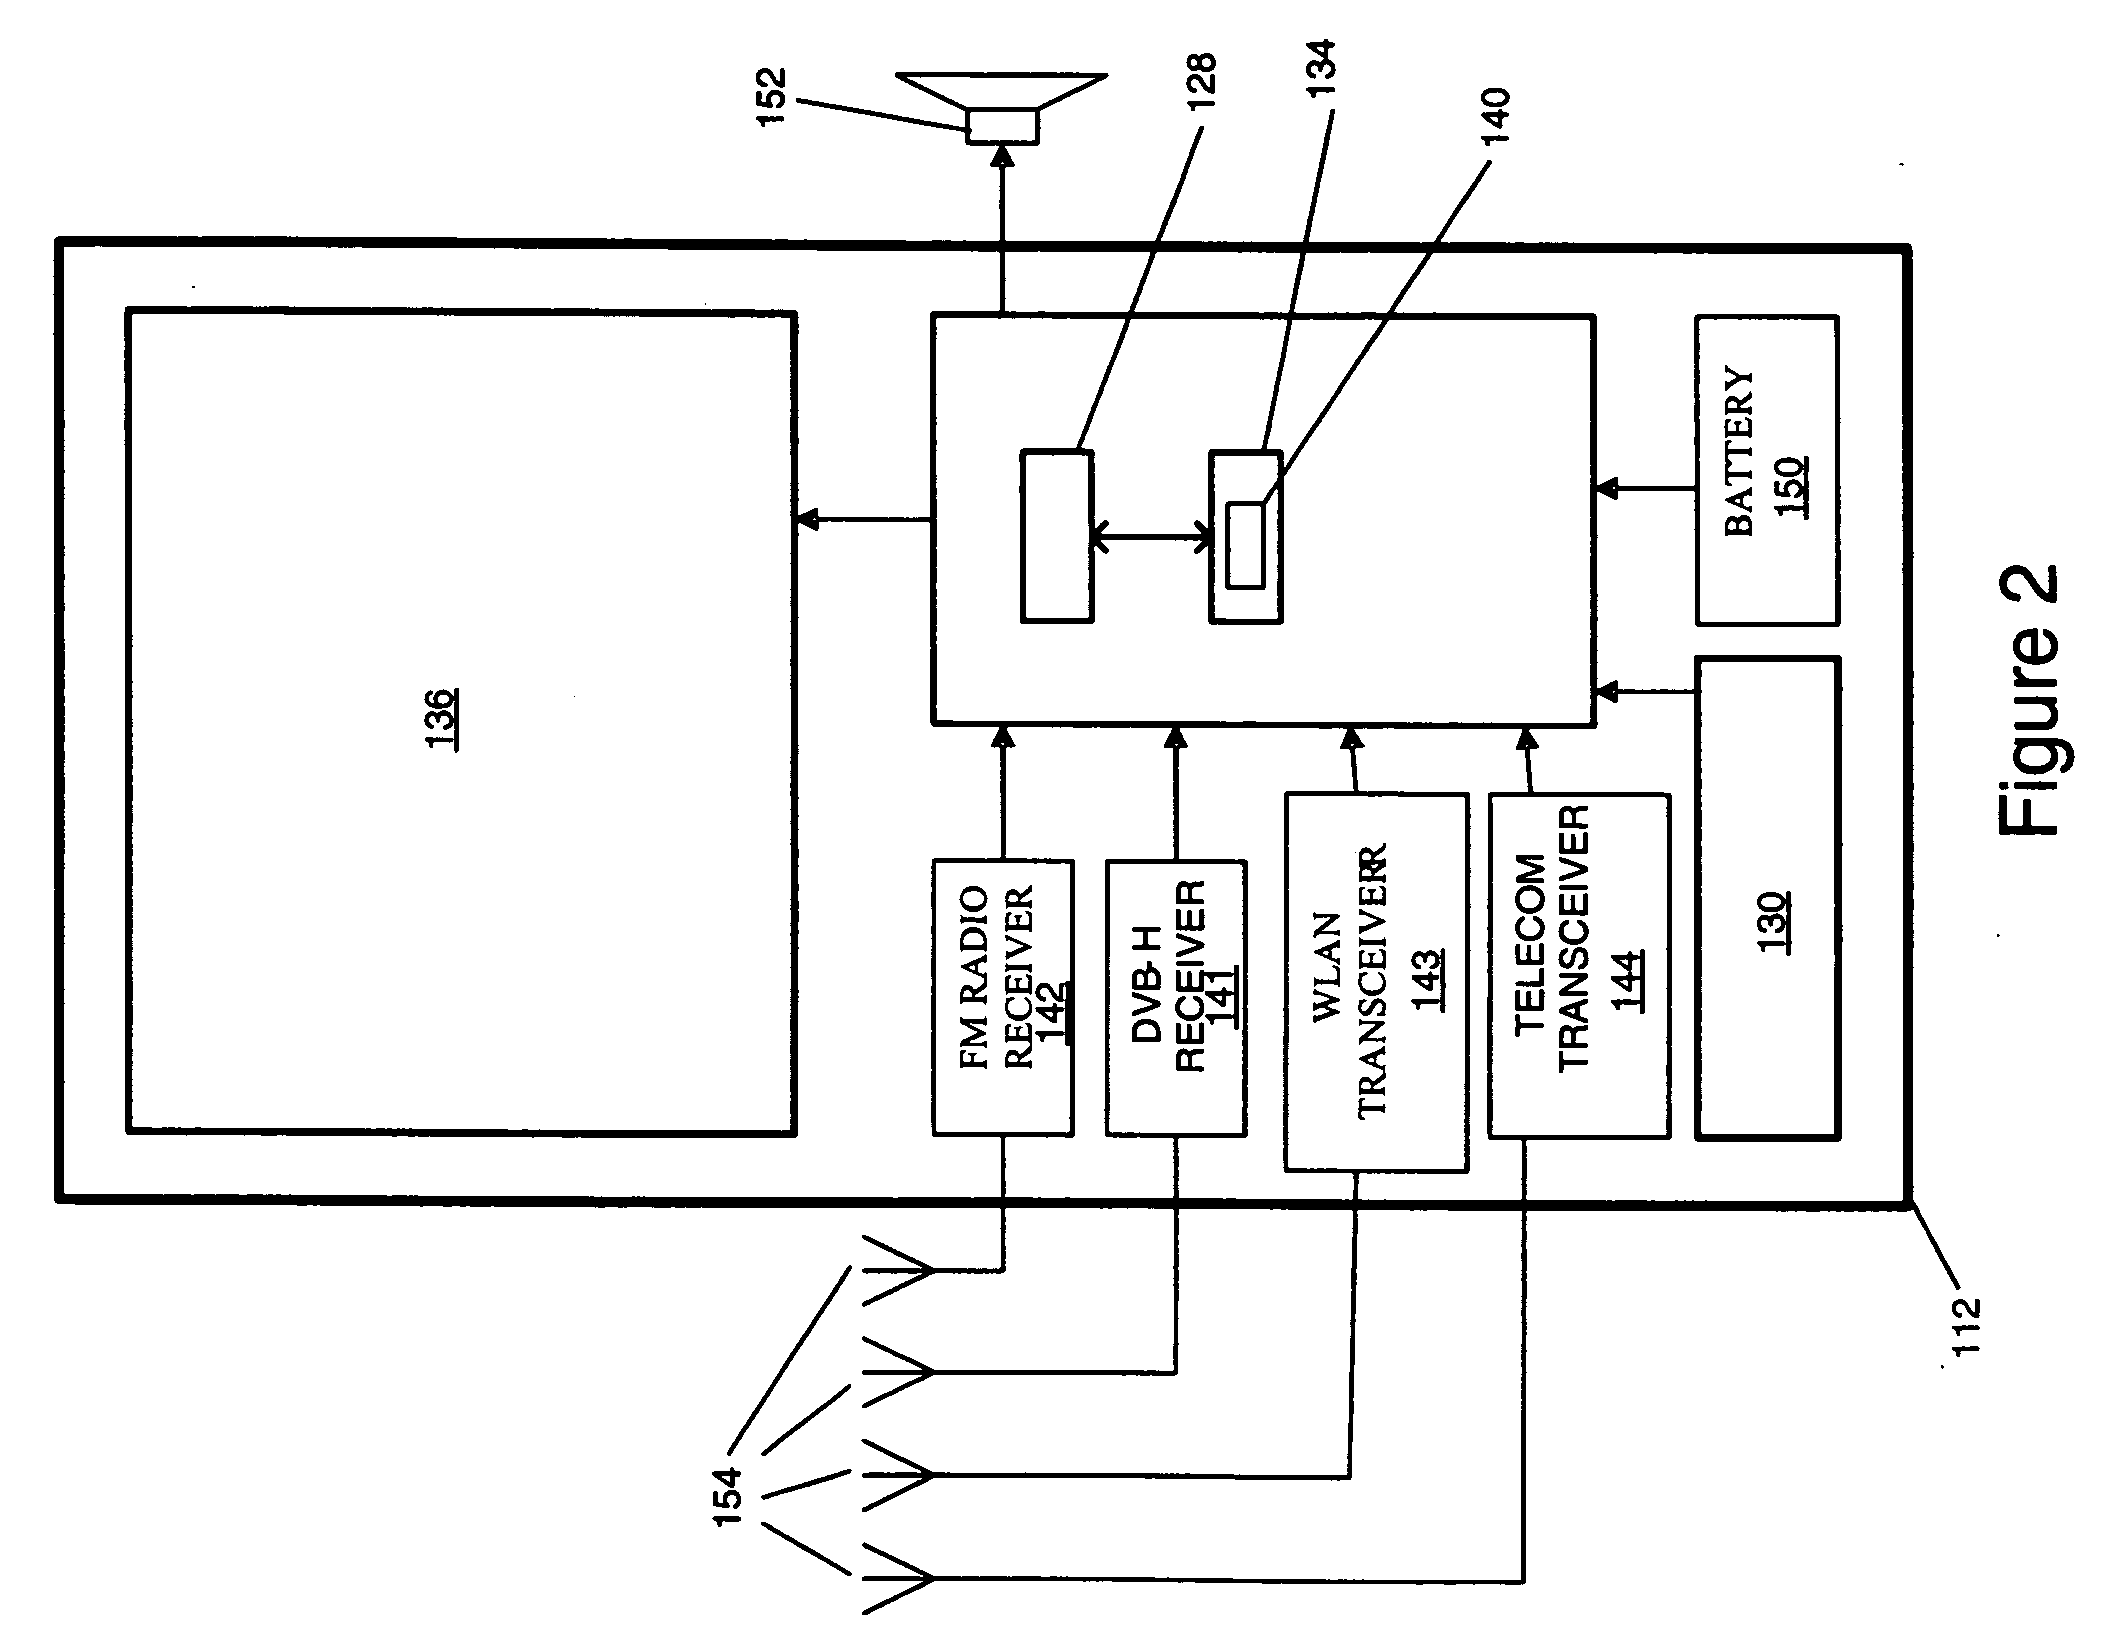 Enhanced electronic service guide container